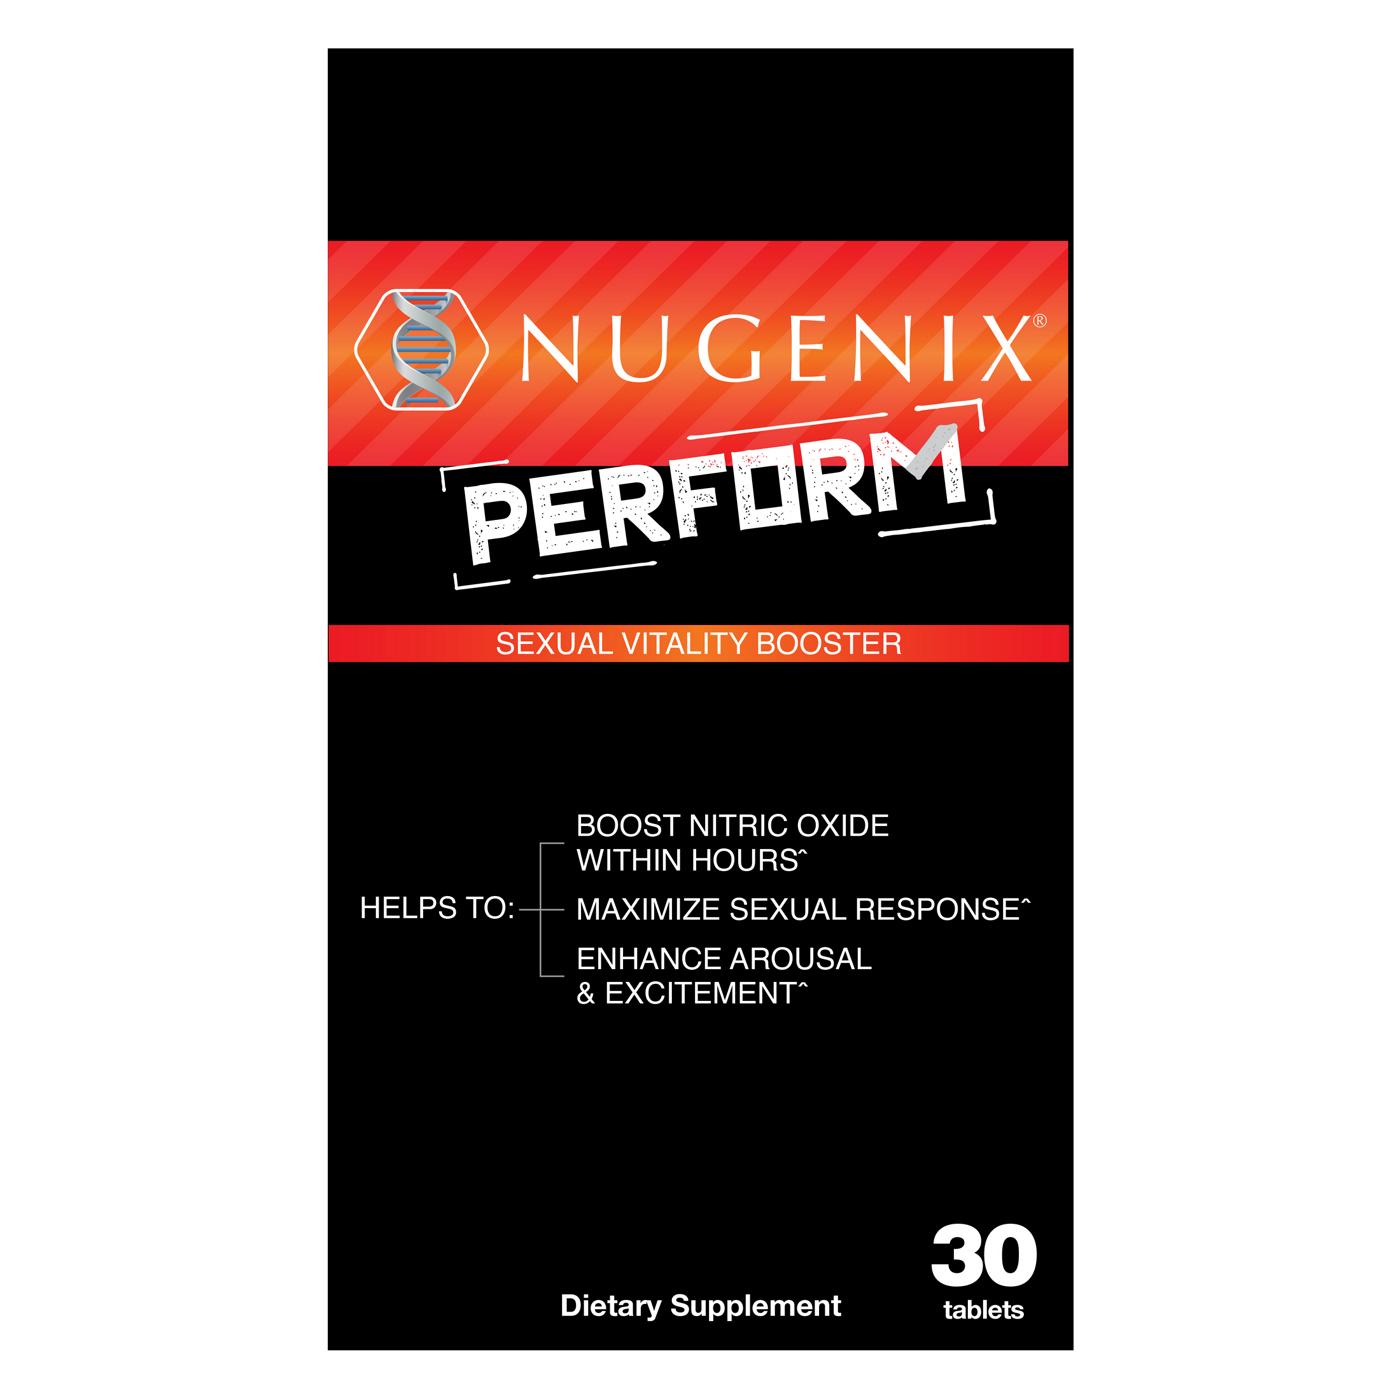 Nugenix Perform Sexual Vitality Booster Tablets; image 1 of 3